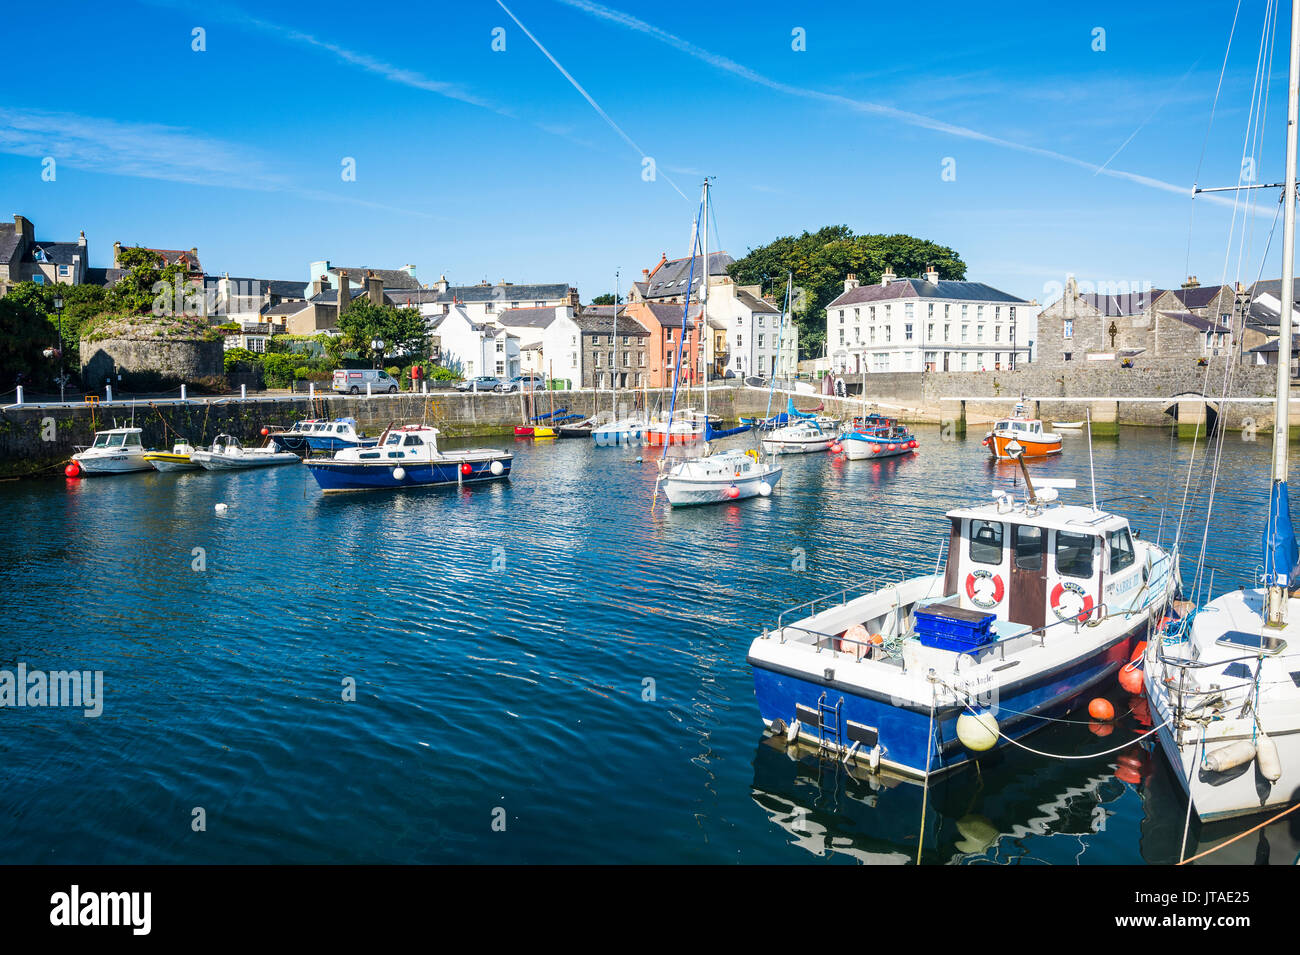 Harbour of Castletown, Isle of Man, crown dependency of the United Kingdom, Europe Stock Photo